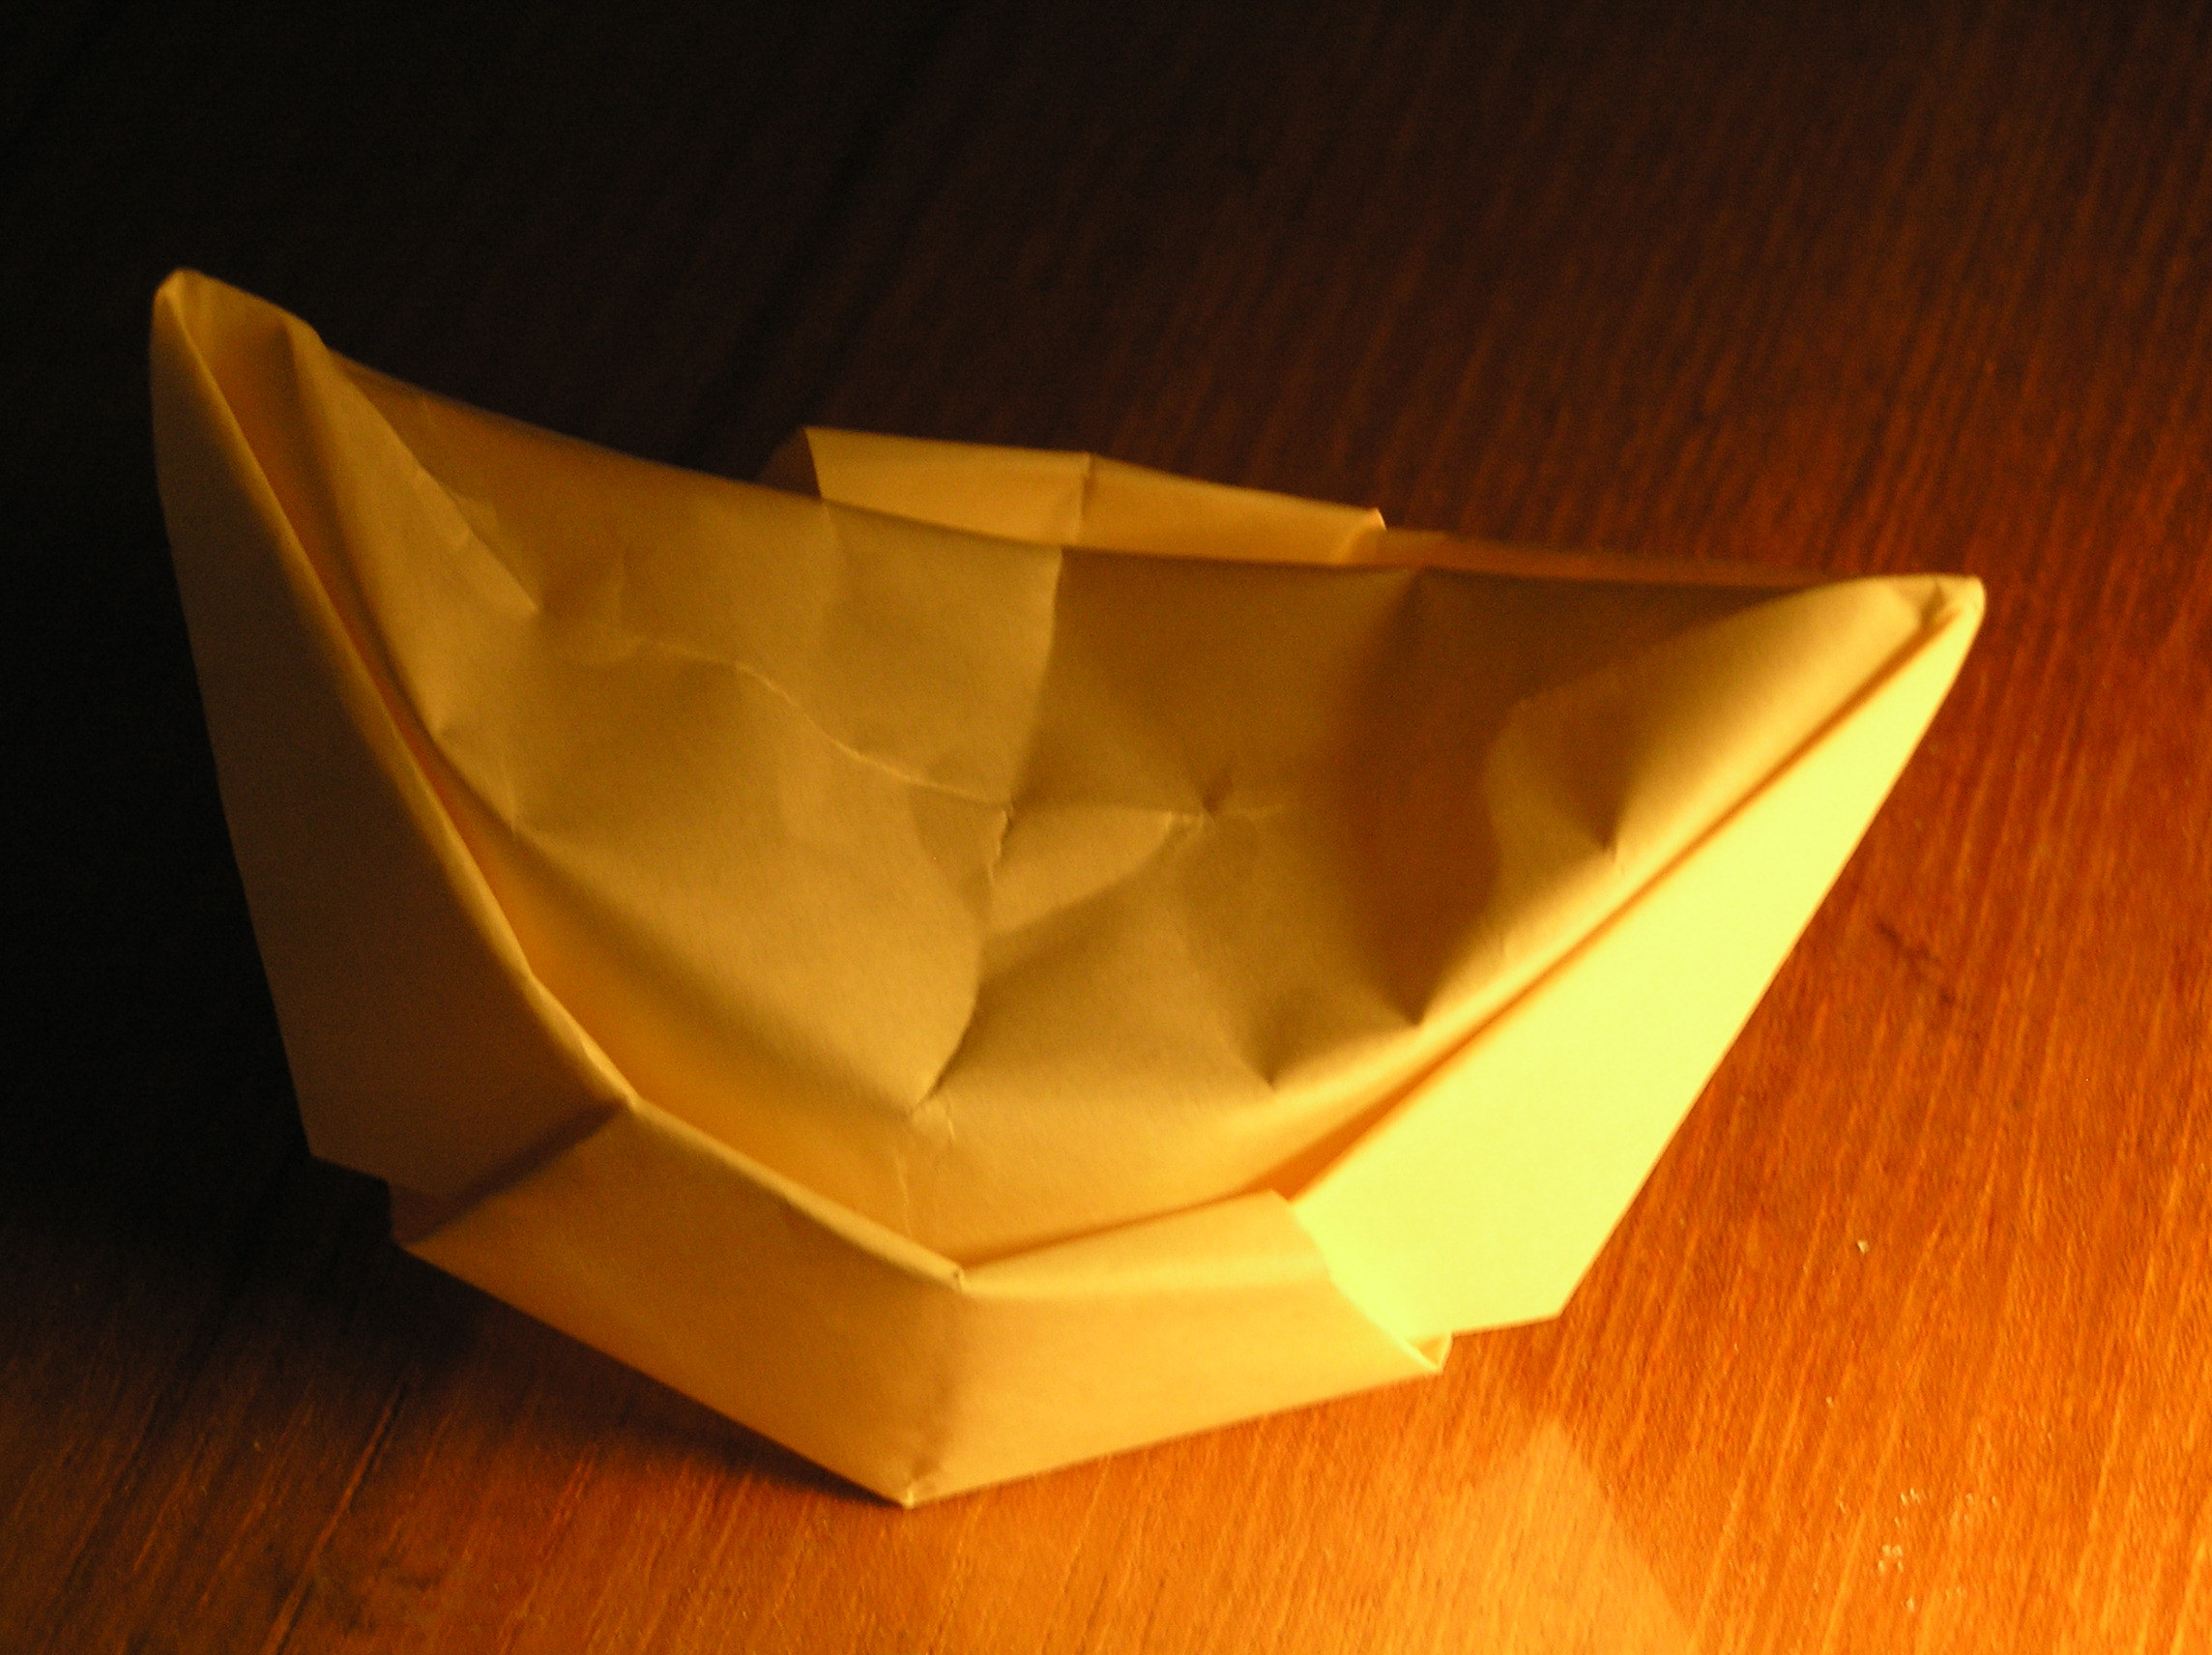 Index Card Origami Chinese Paper Folding Wikipedia